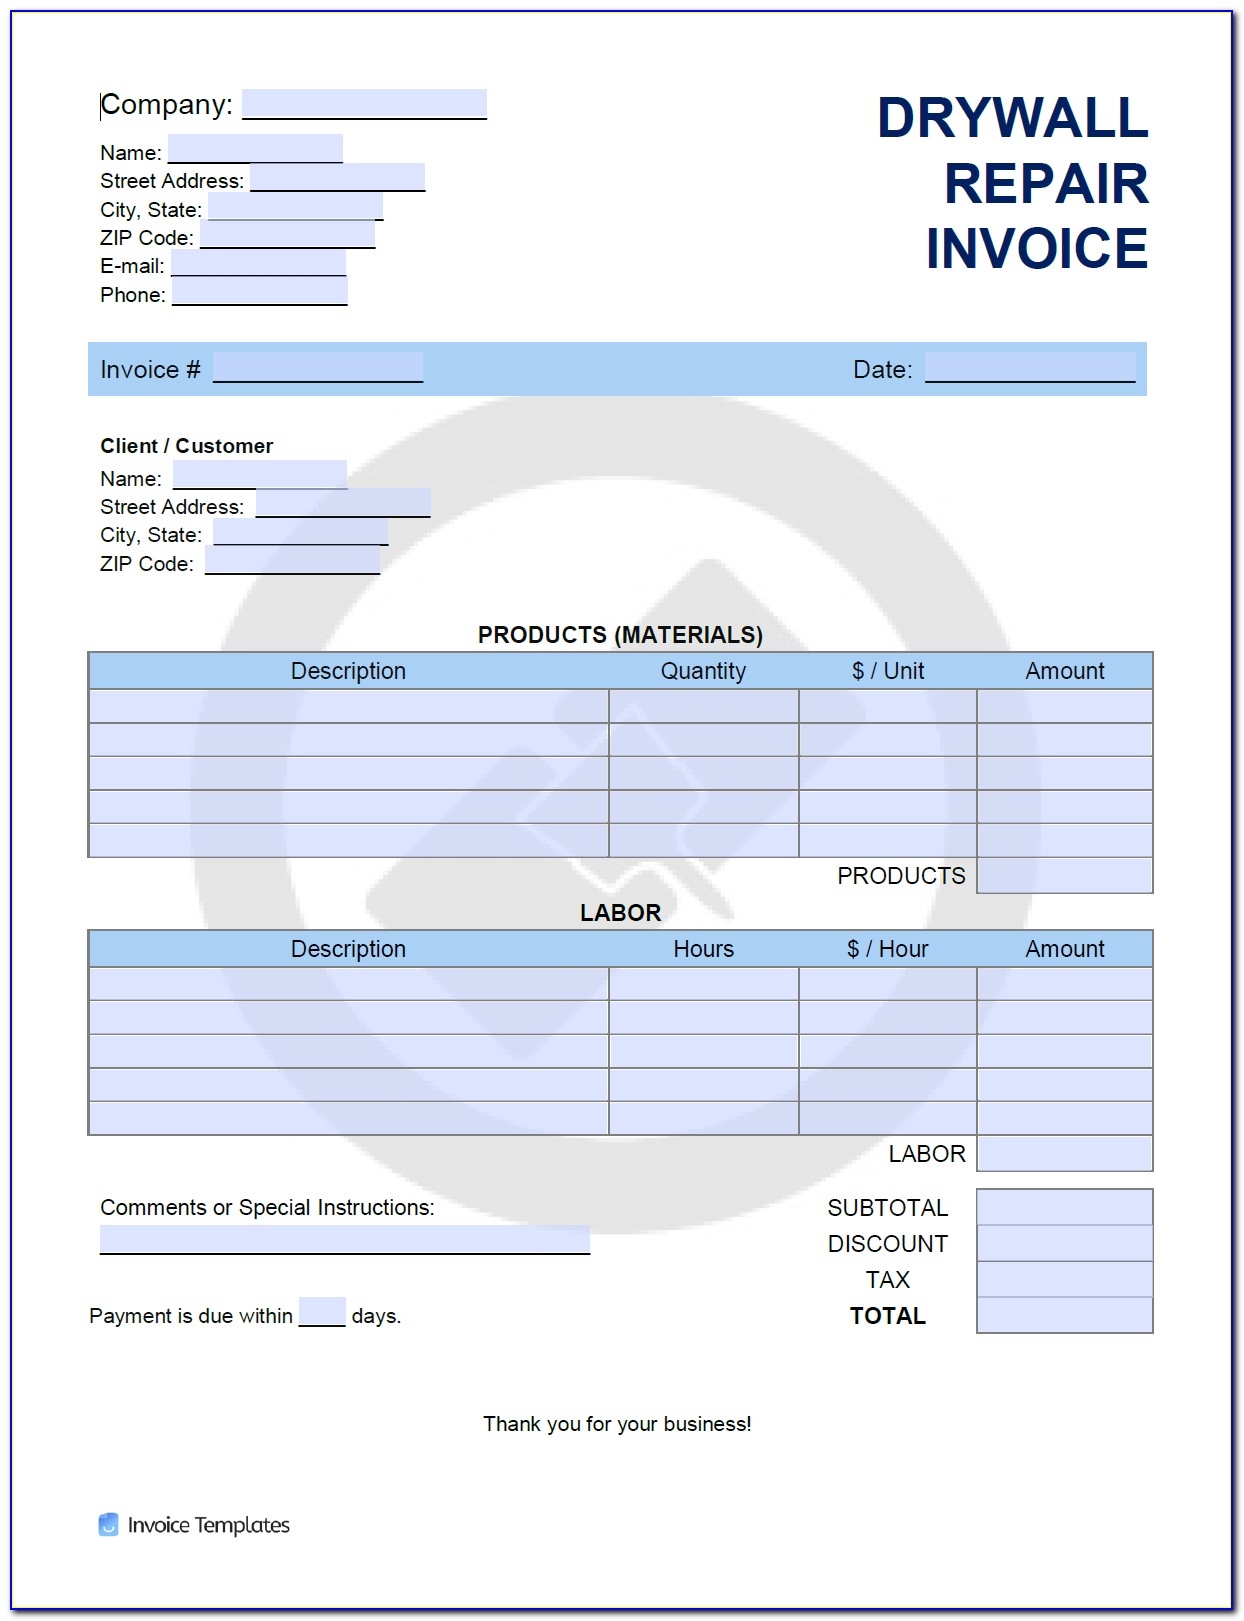 Drywall Invoice Example